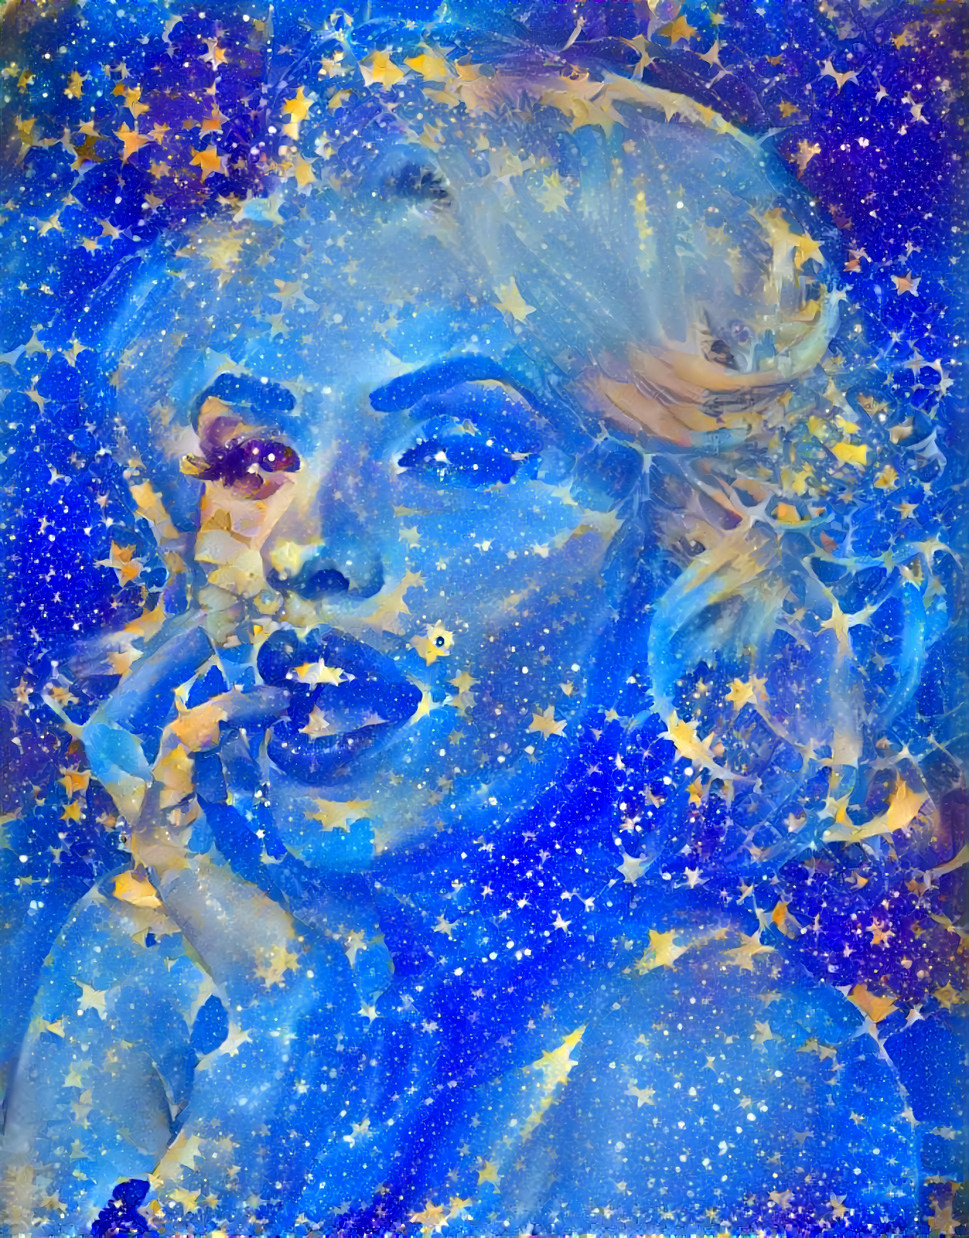 marilyn monroe touching lip, saturated blue, stars